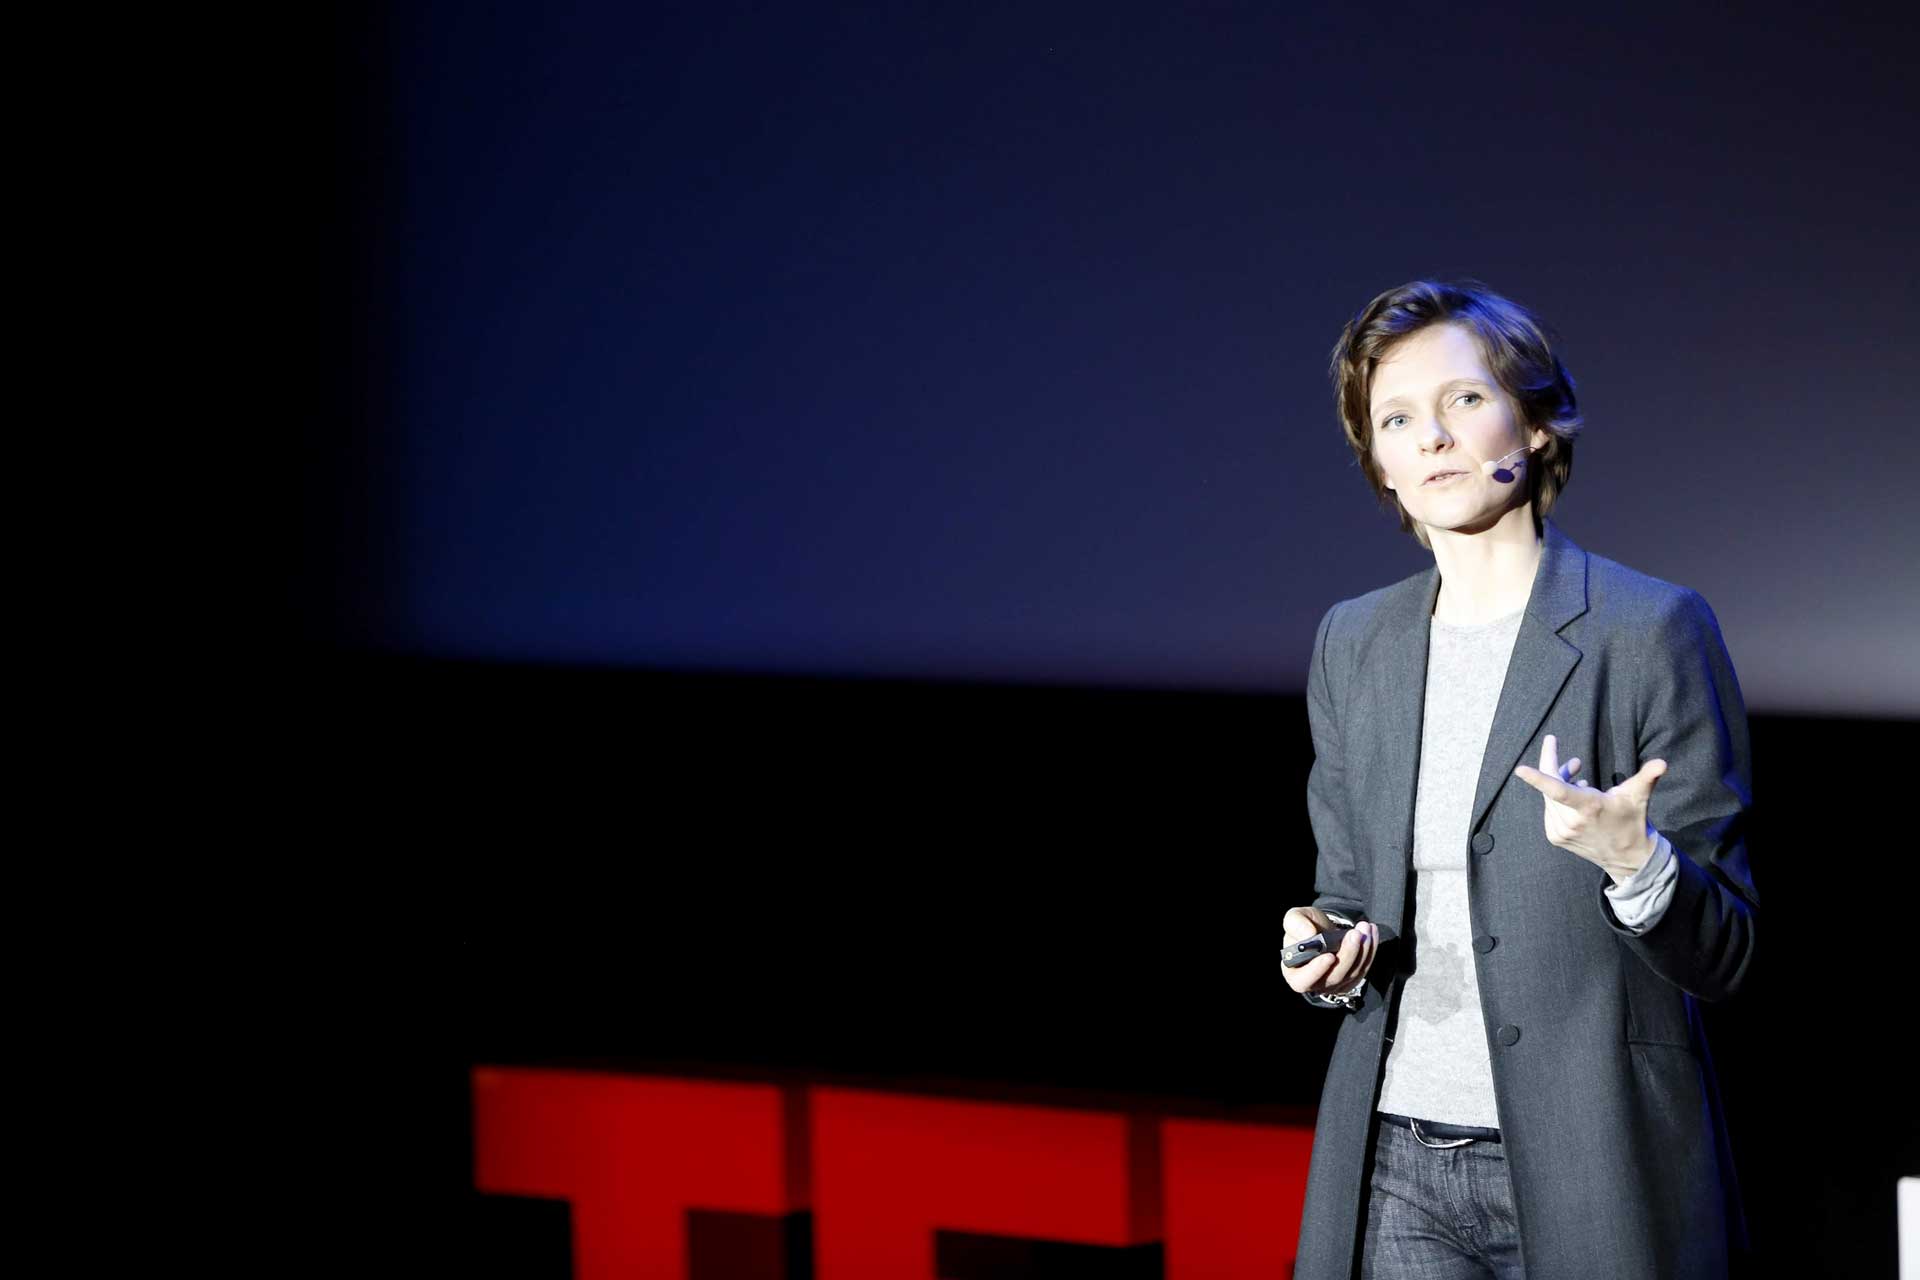 conference-TEDxParis-2013-7.jpg